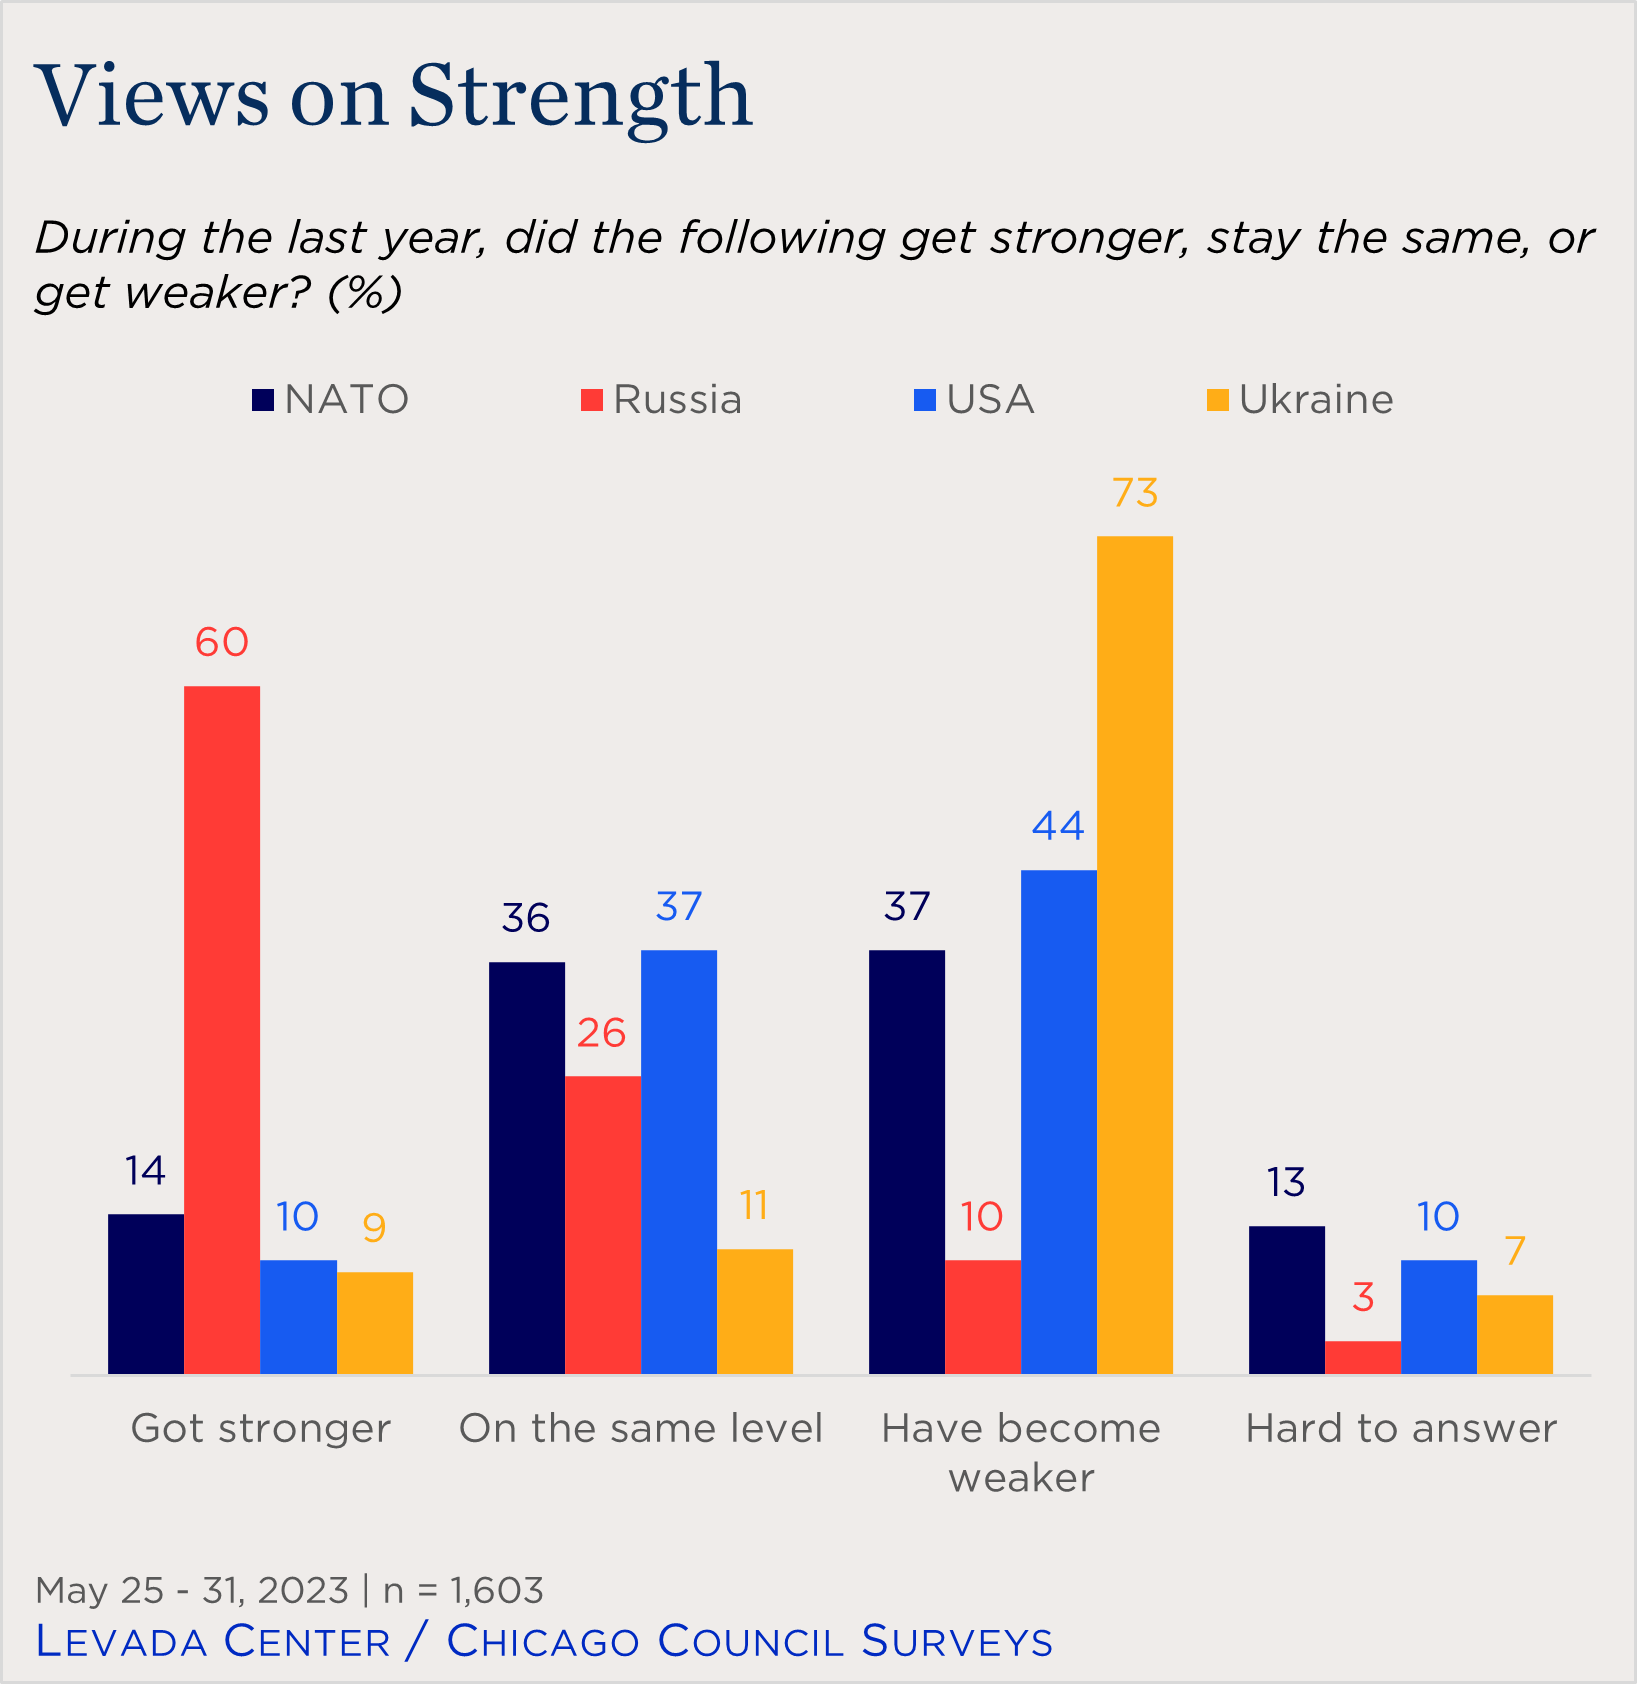 "bar chart showing views of NATO alliance strength over time"